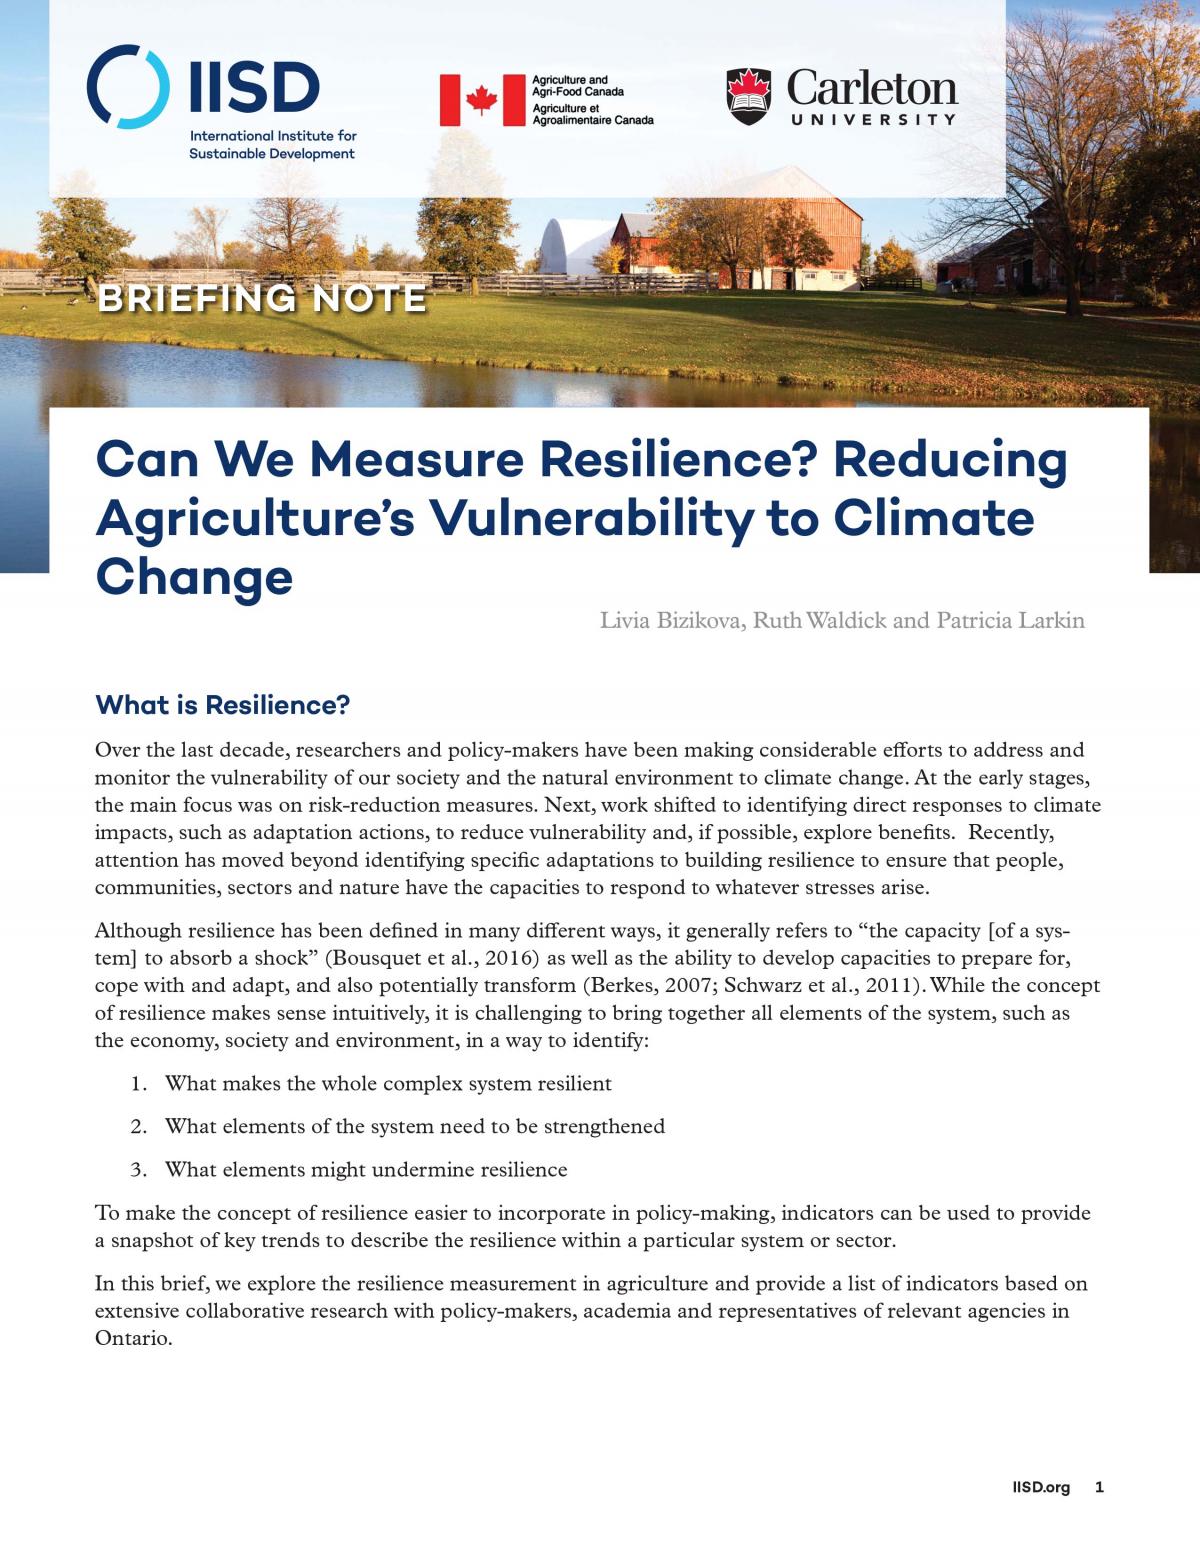 climate change research paper 2019